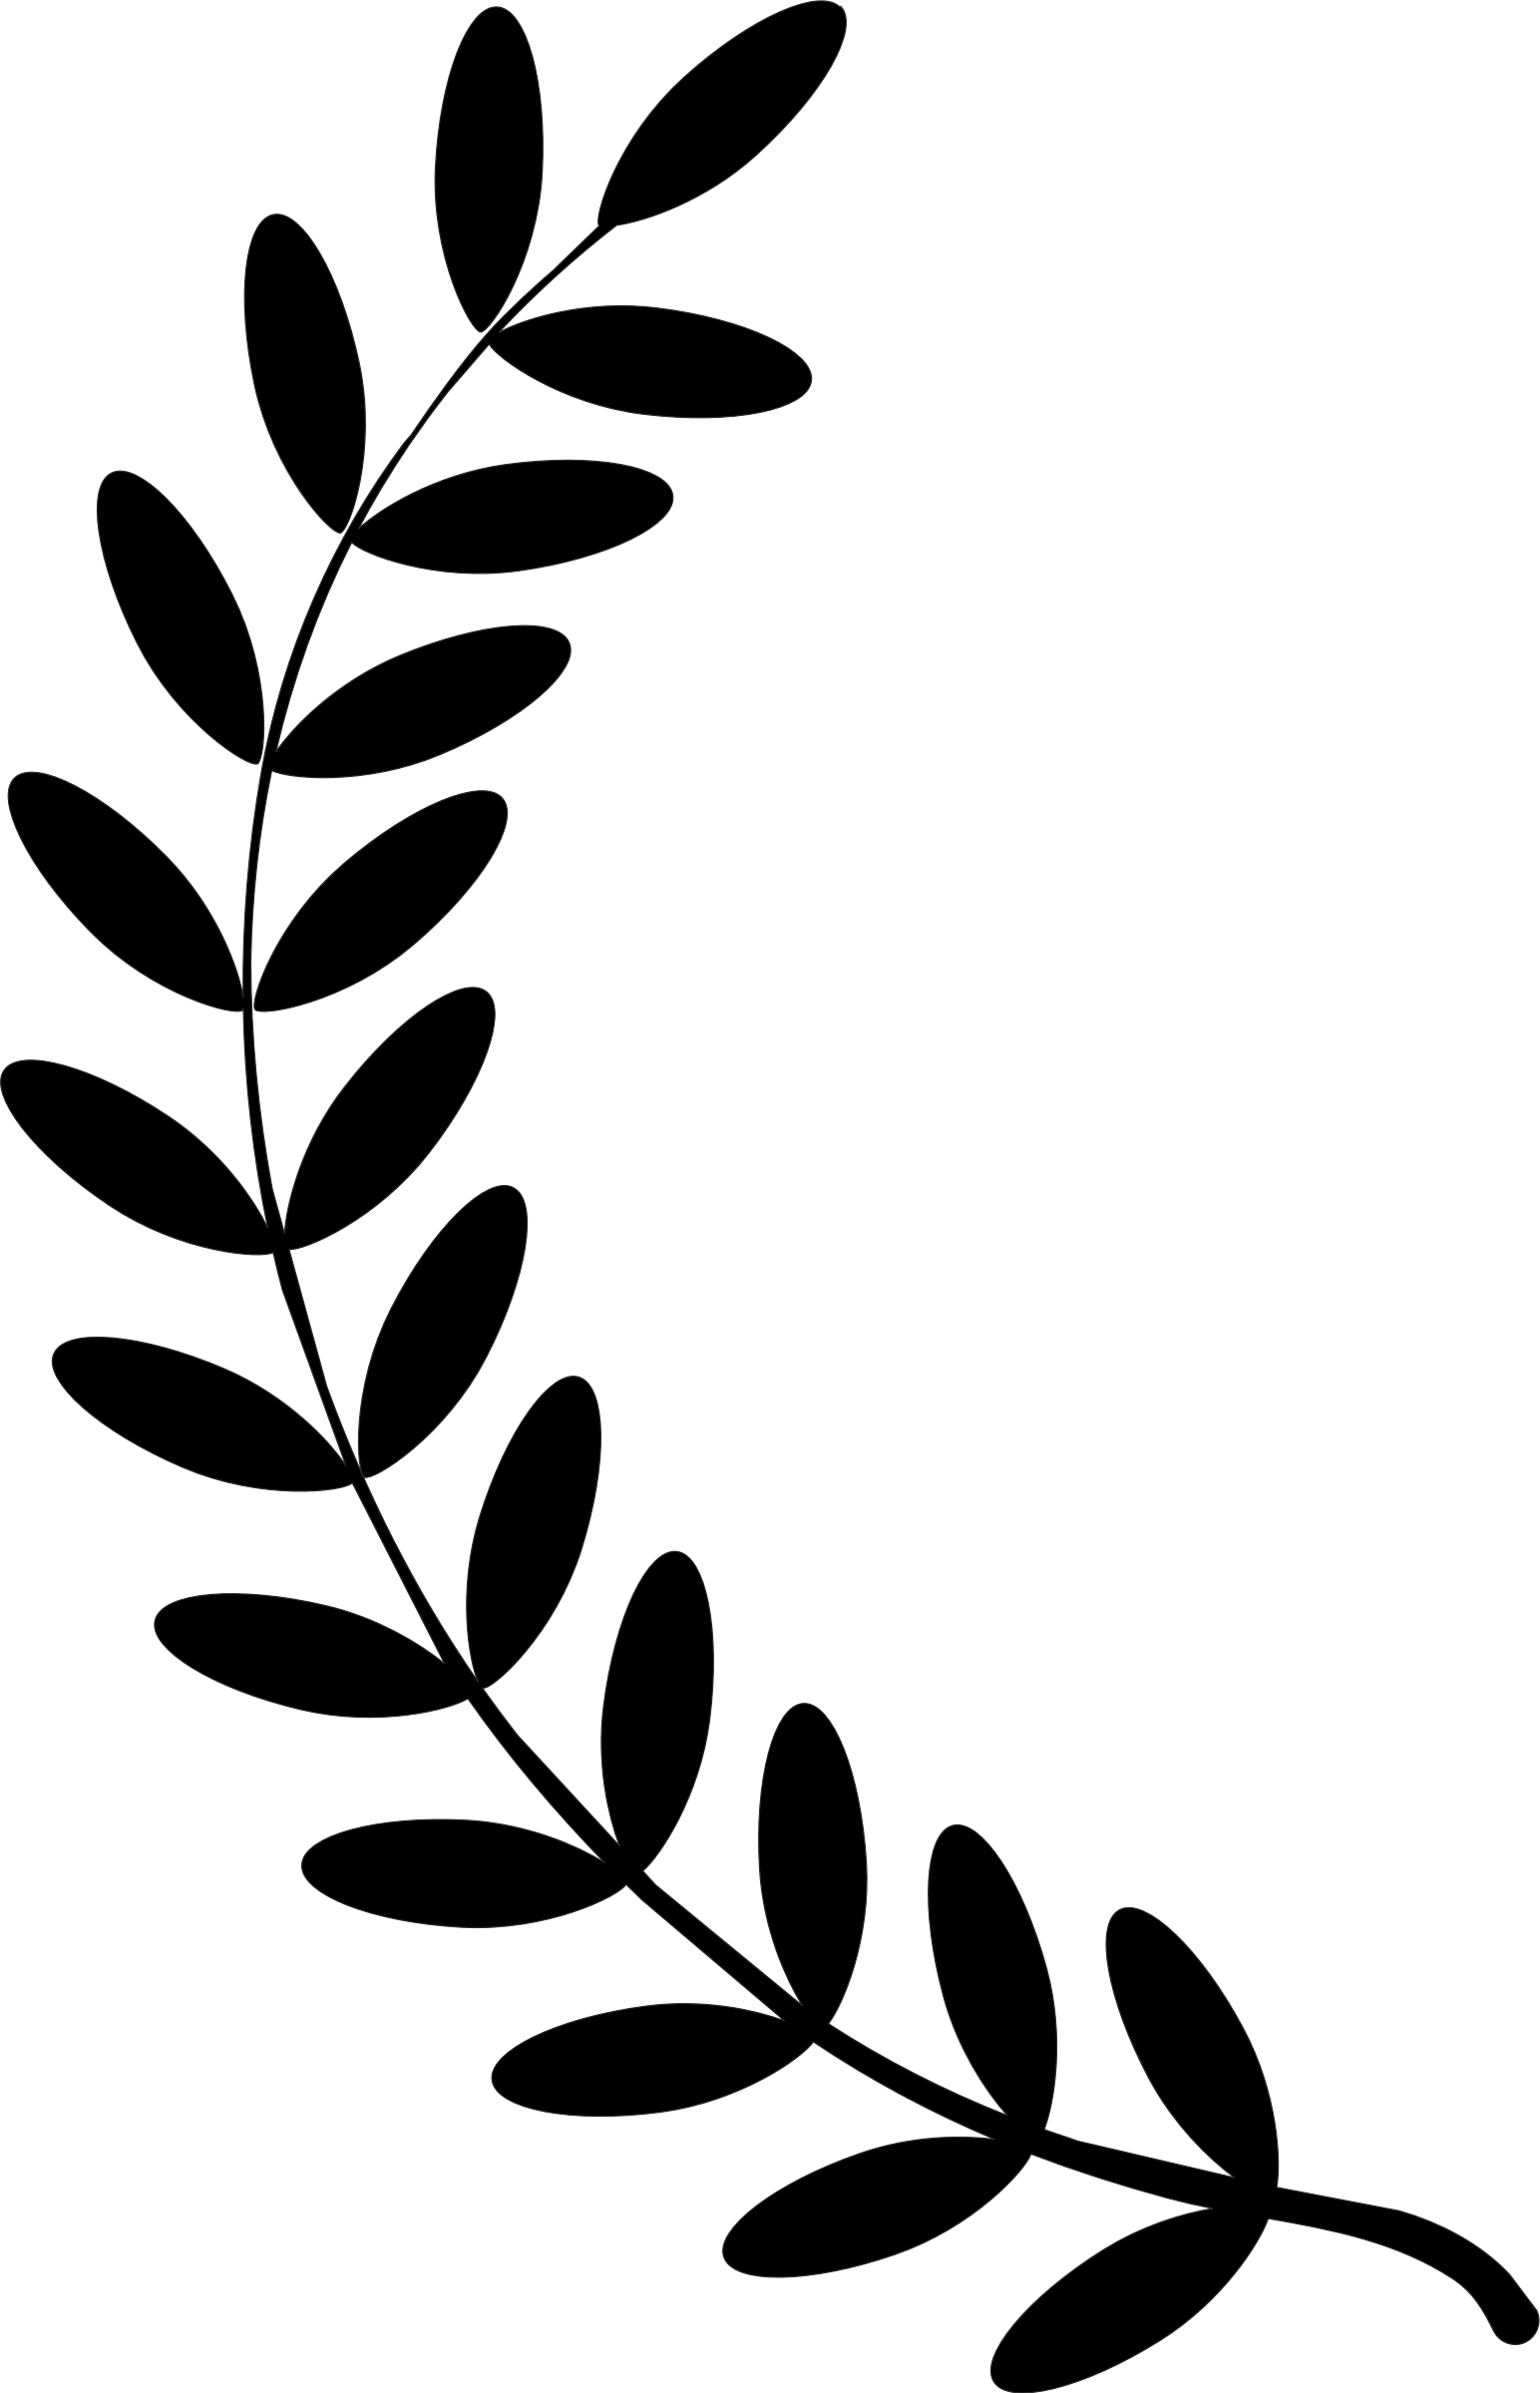 Free Branch Clipart Black And White, Download Free Clip Art.